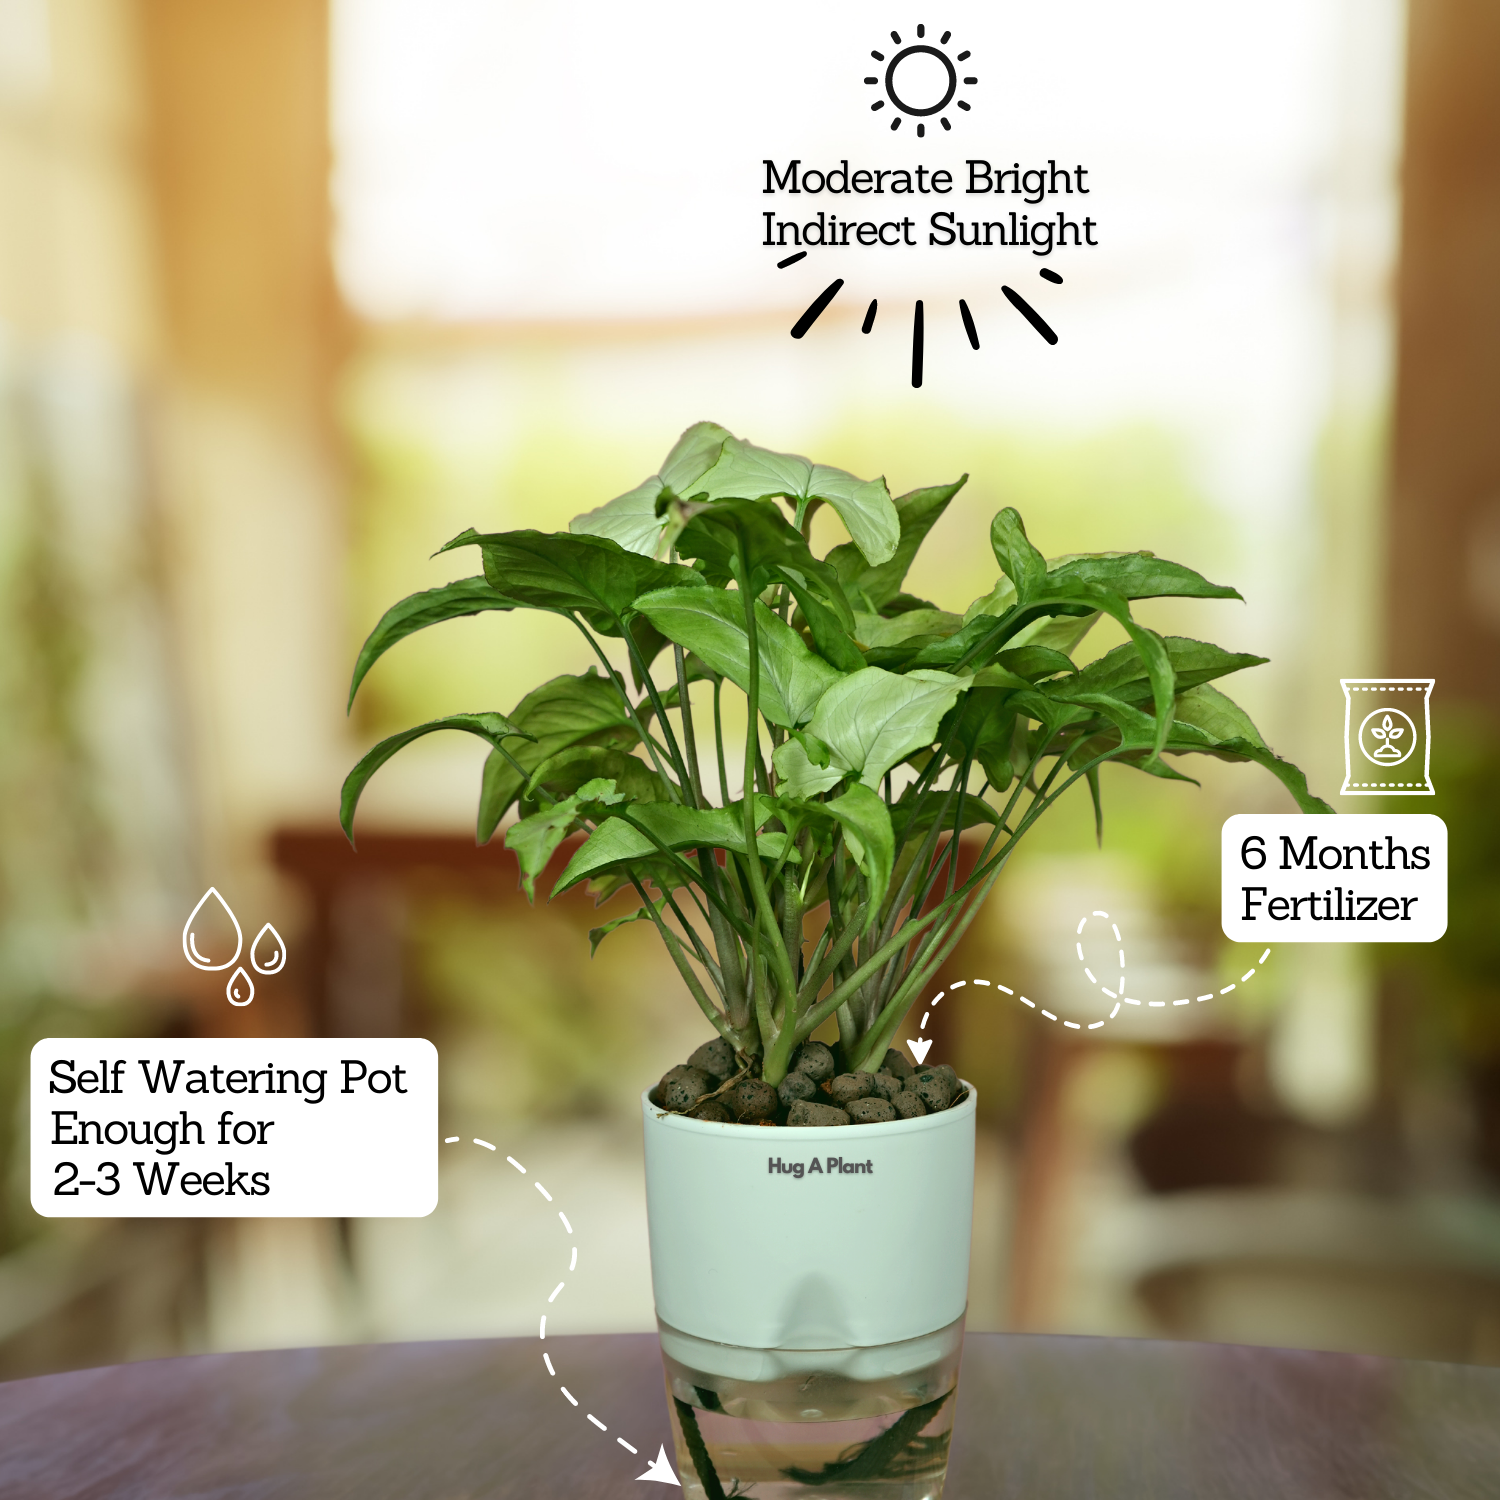 White Syngonium - Live Plant (With Self-Watering Pot & Plant)